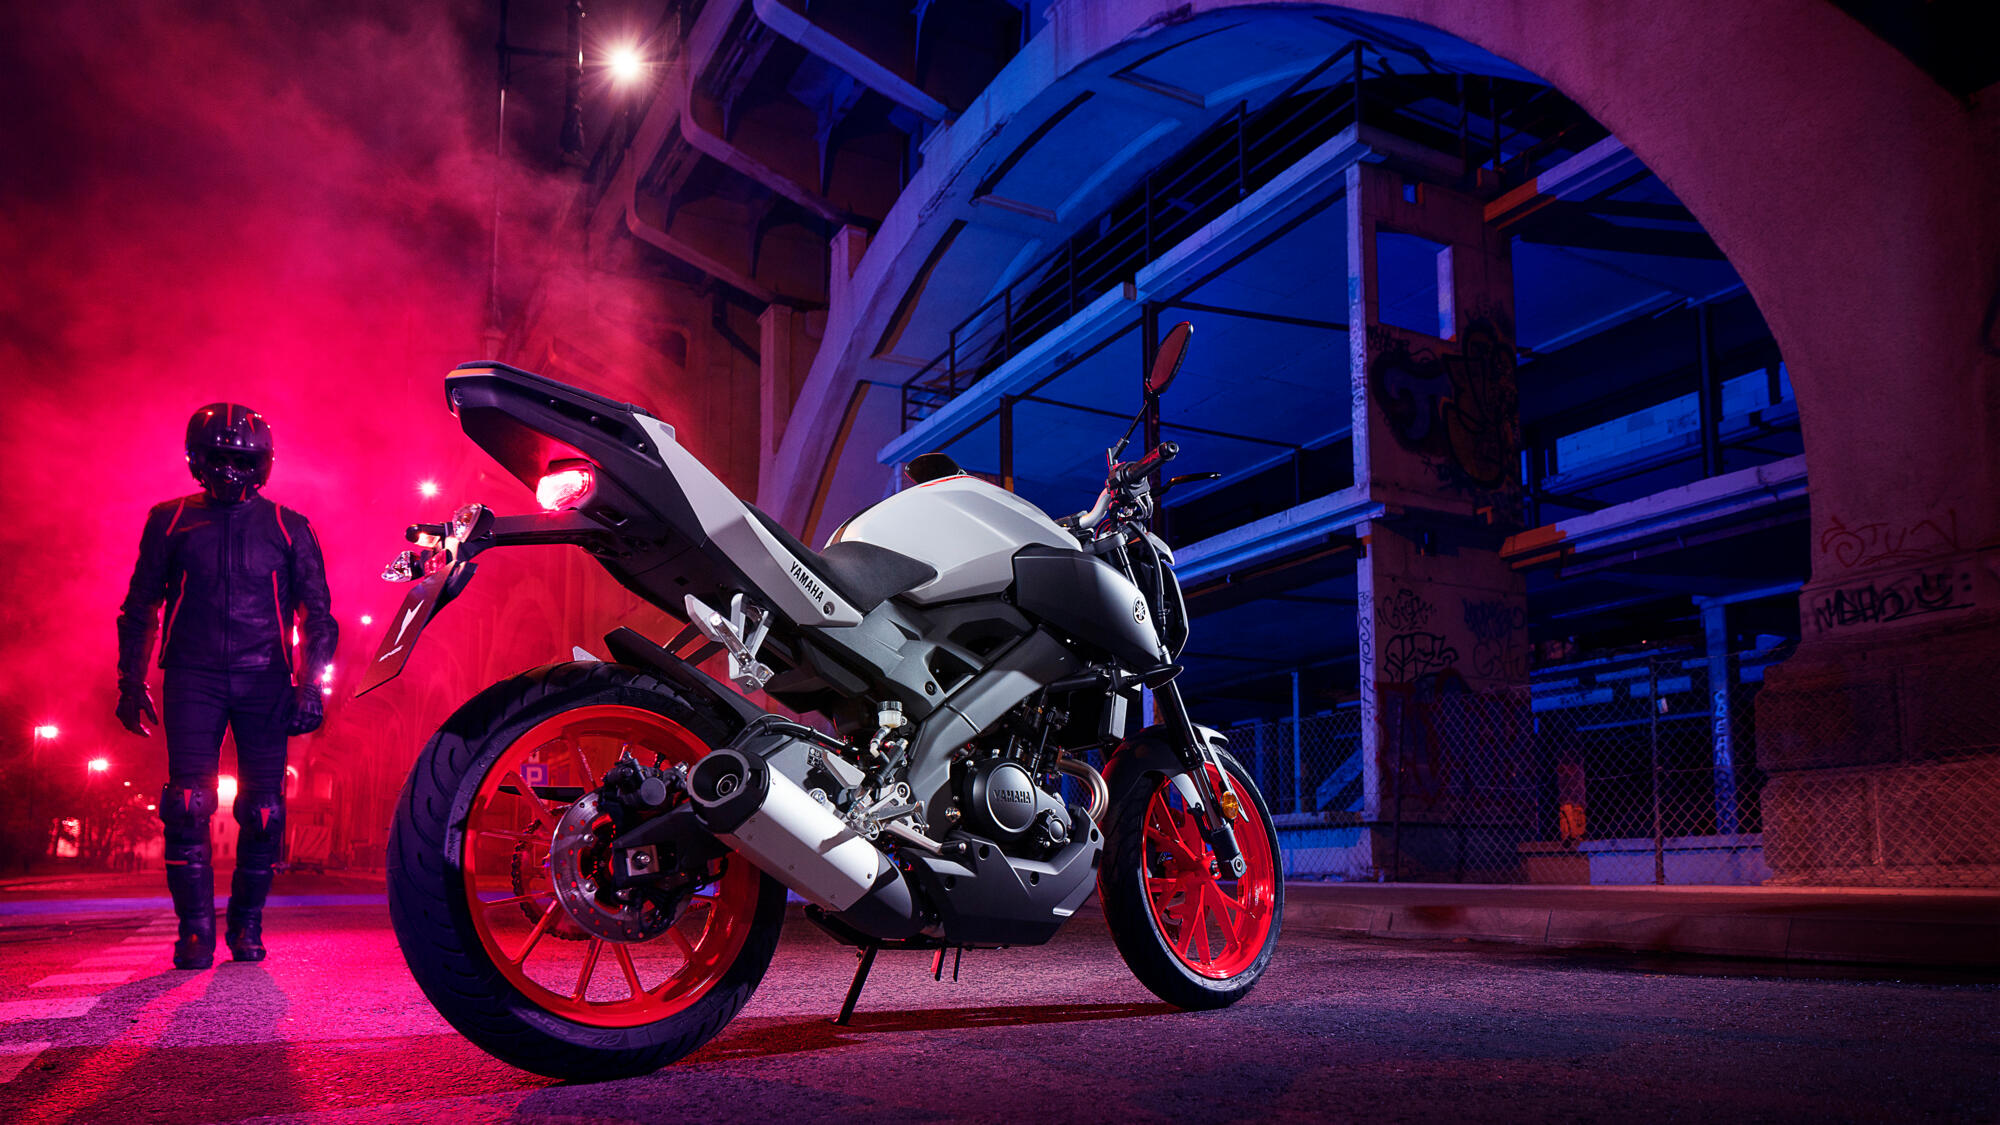 Mt 125 yamaha — mt-125 with their dynamic style, naked 